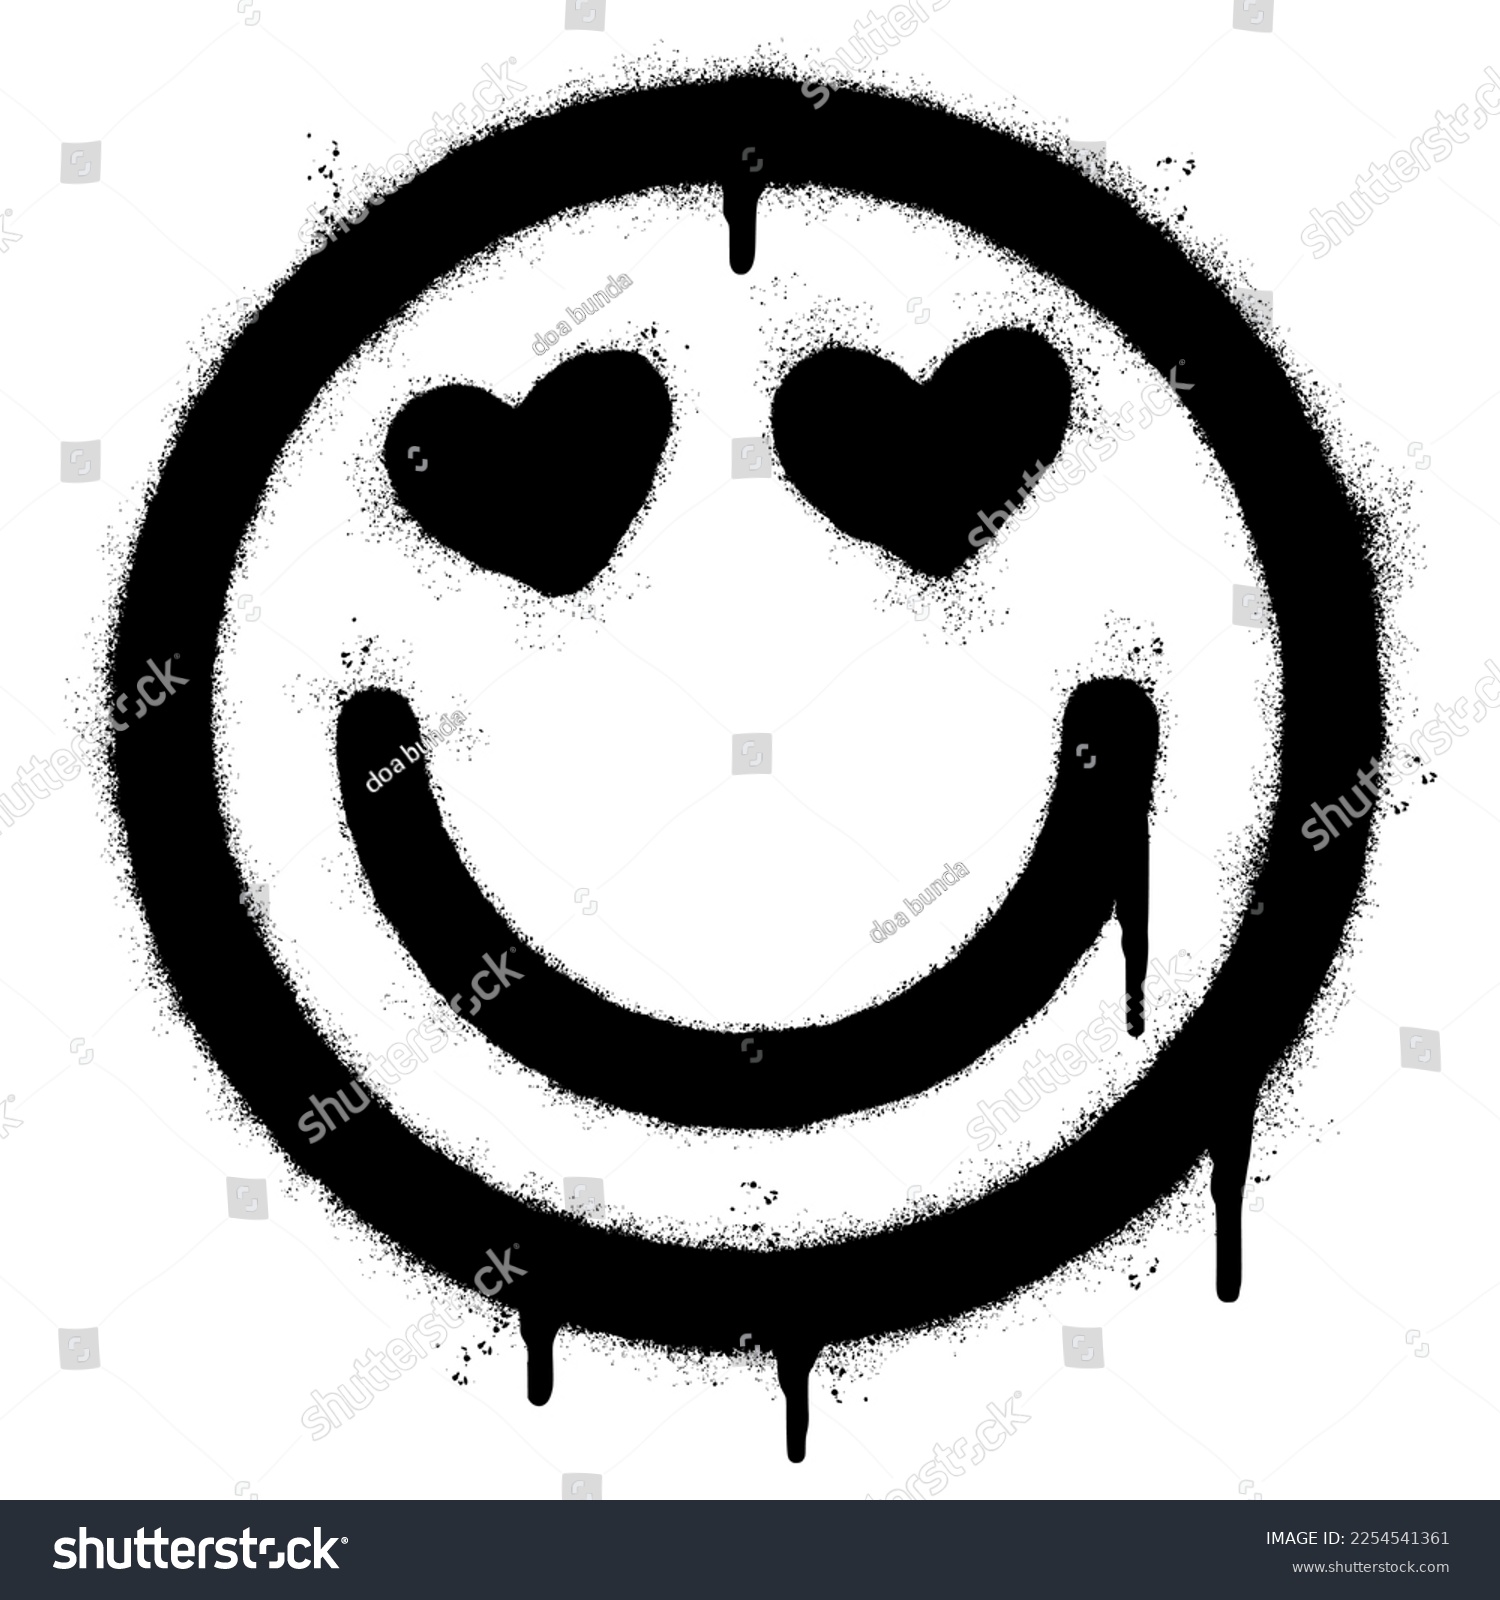 SVG of Spray Painted Graffiti hearts eyes emoticon Sprayed isolated with a white background. graffiti Smile in love emoticon icon with over spray in black over white. svg